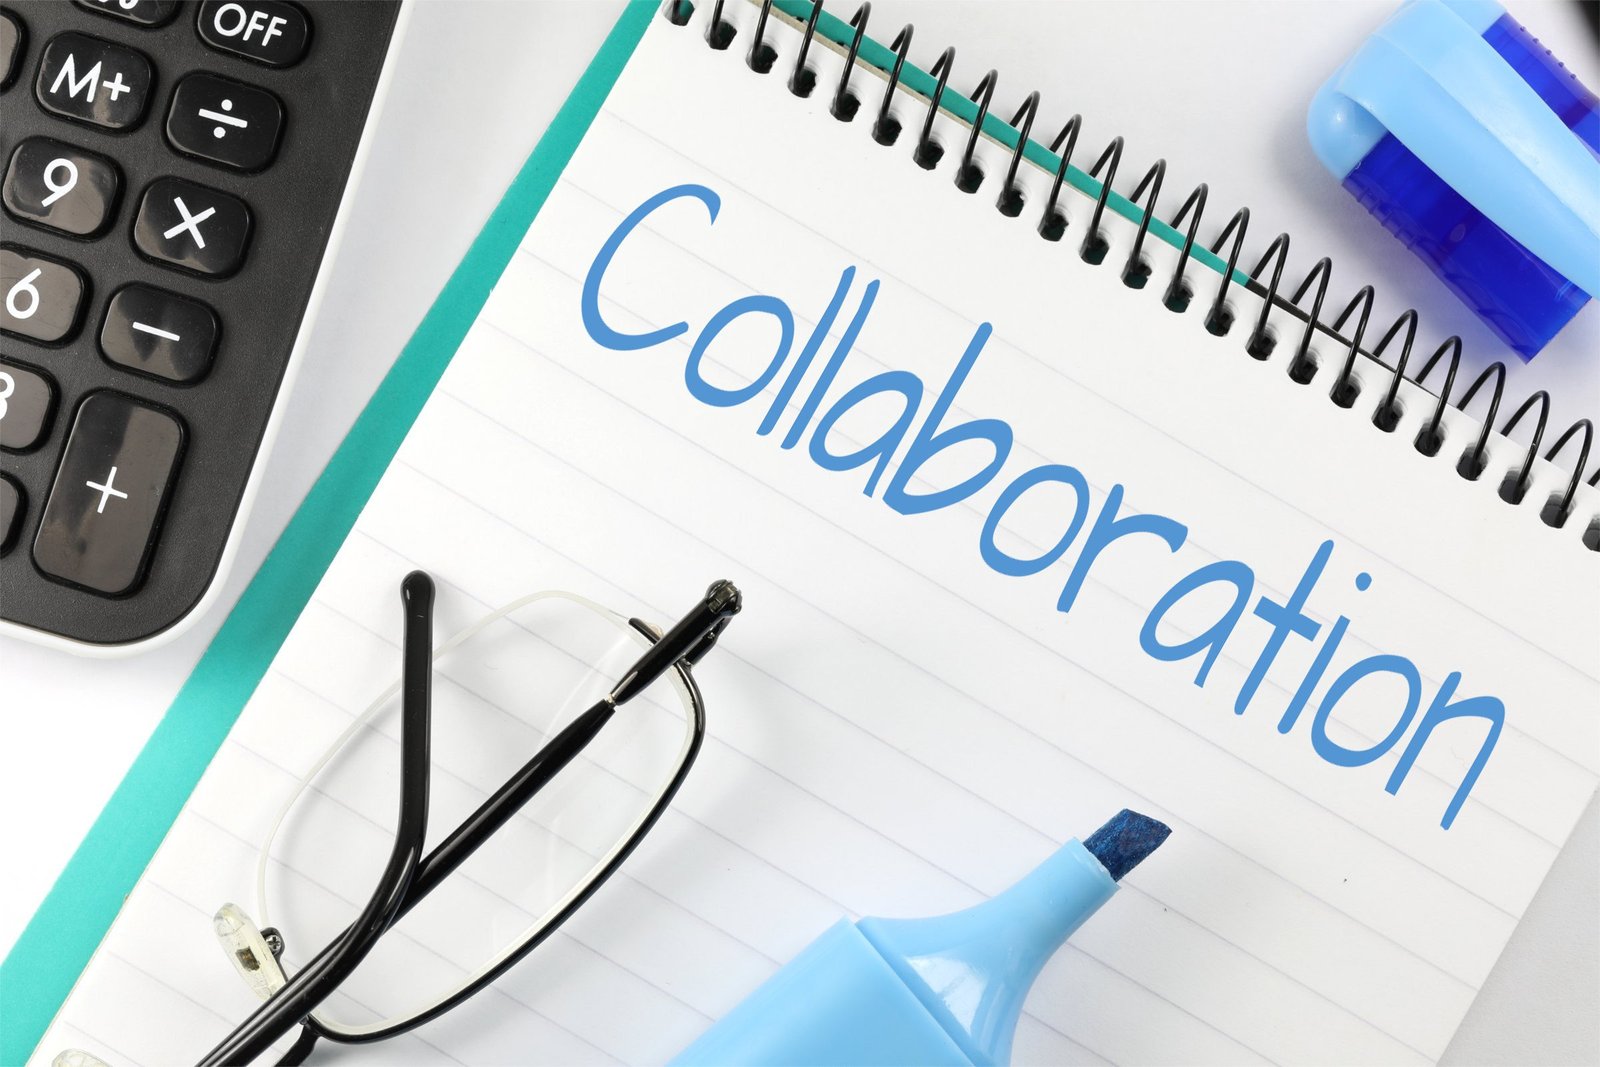 Enhancing Collaboration and Networking Opportunities